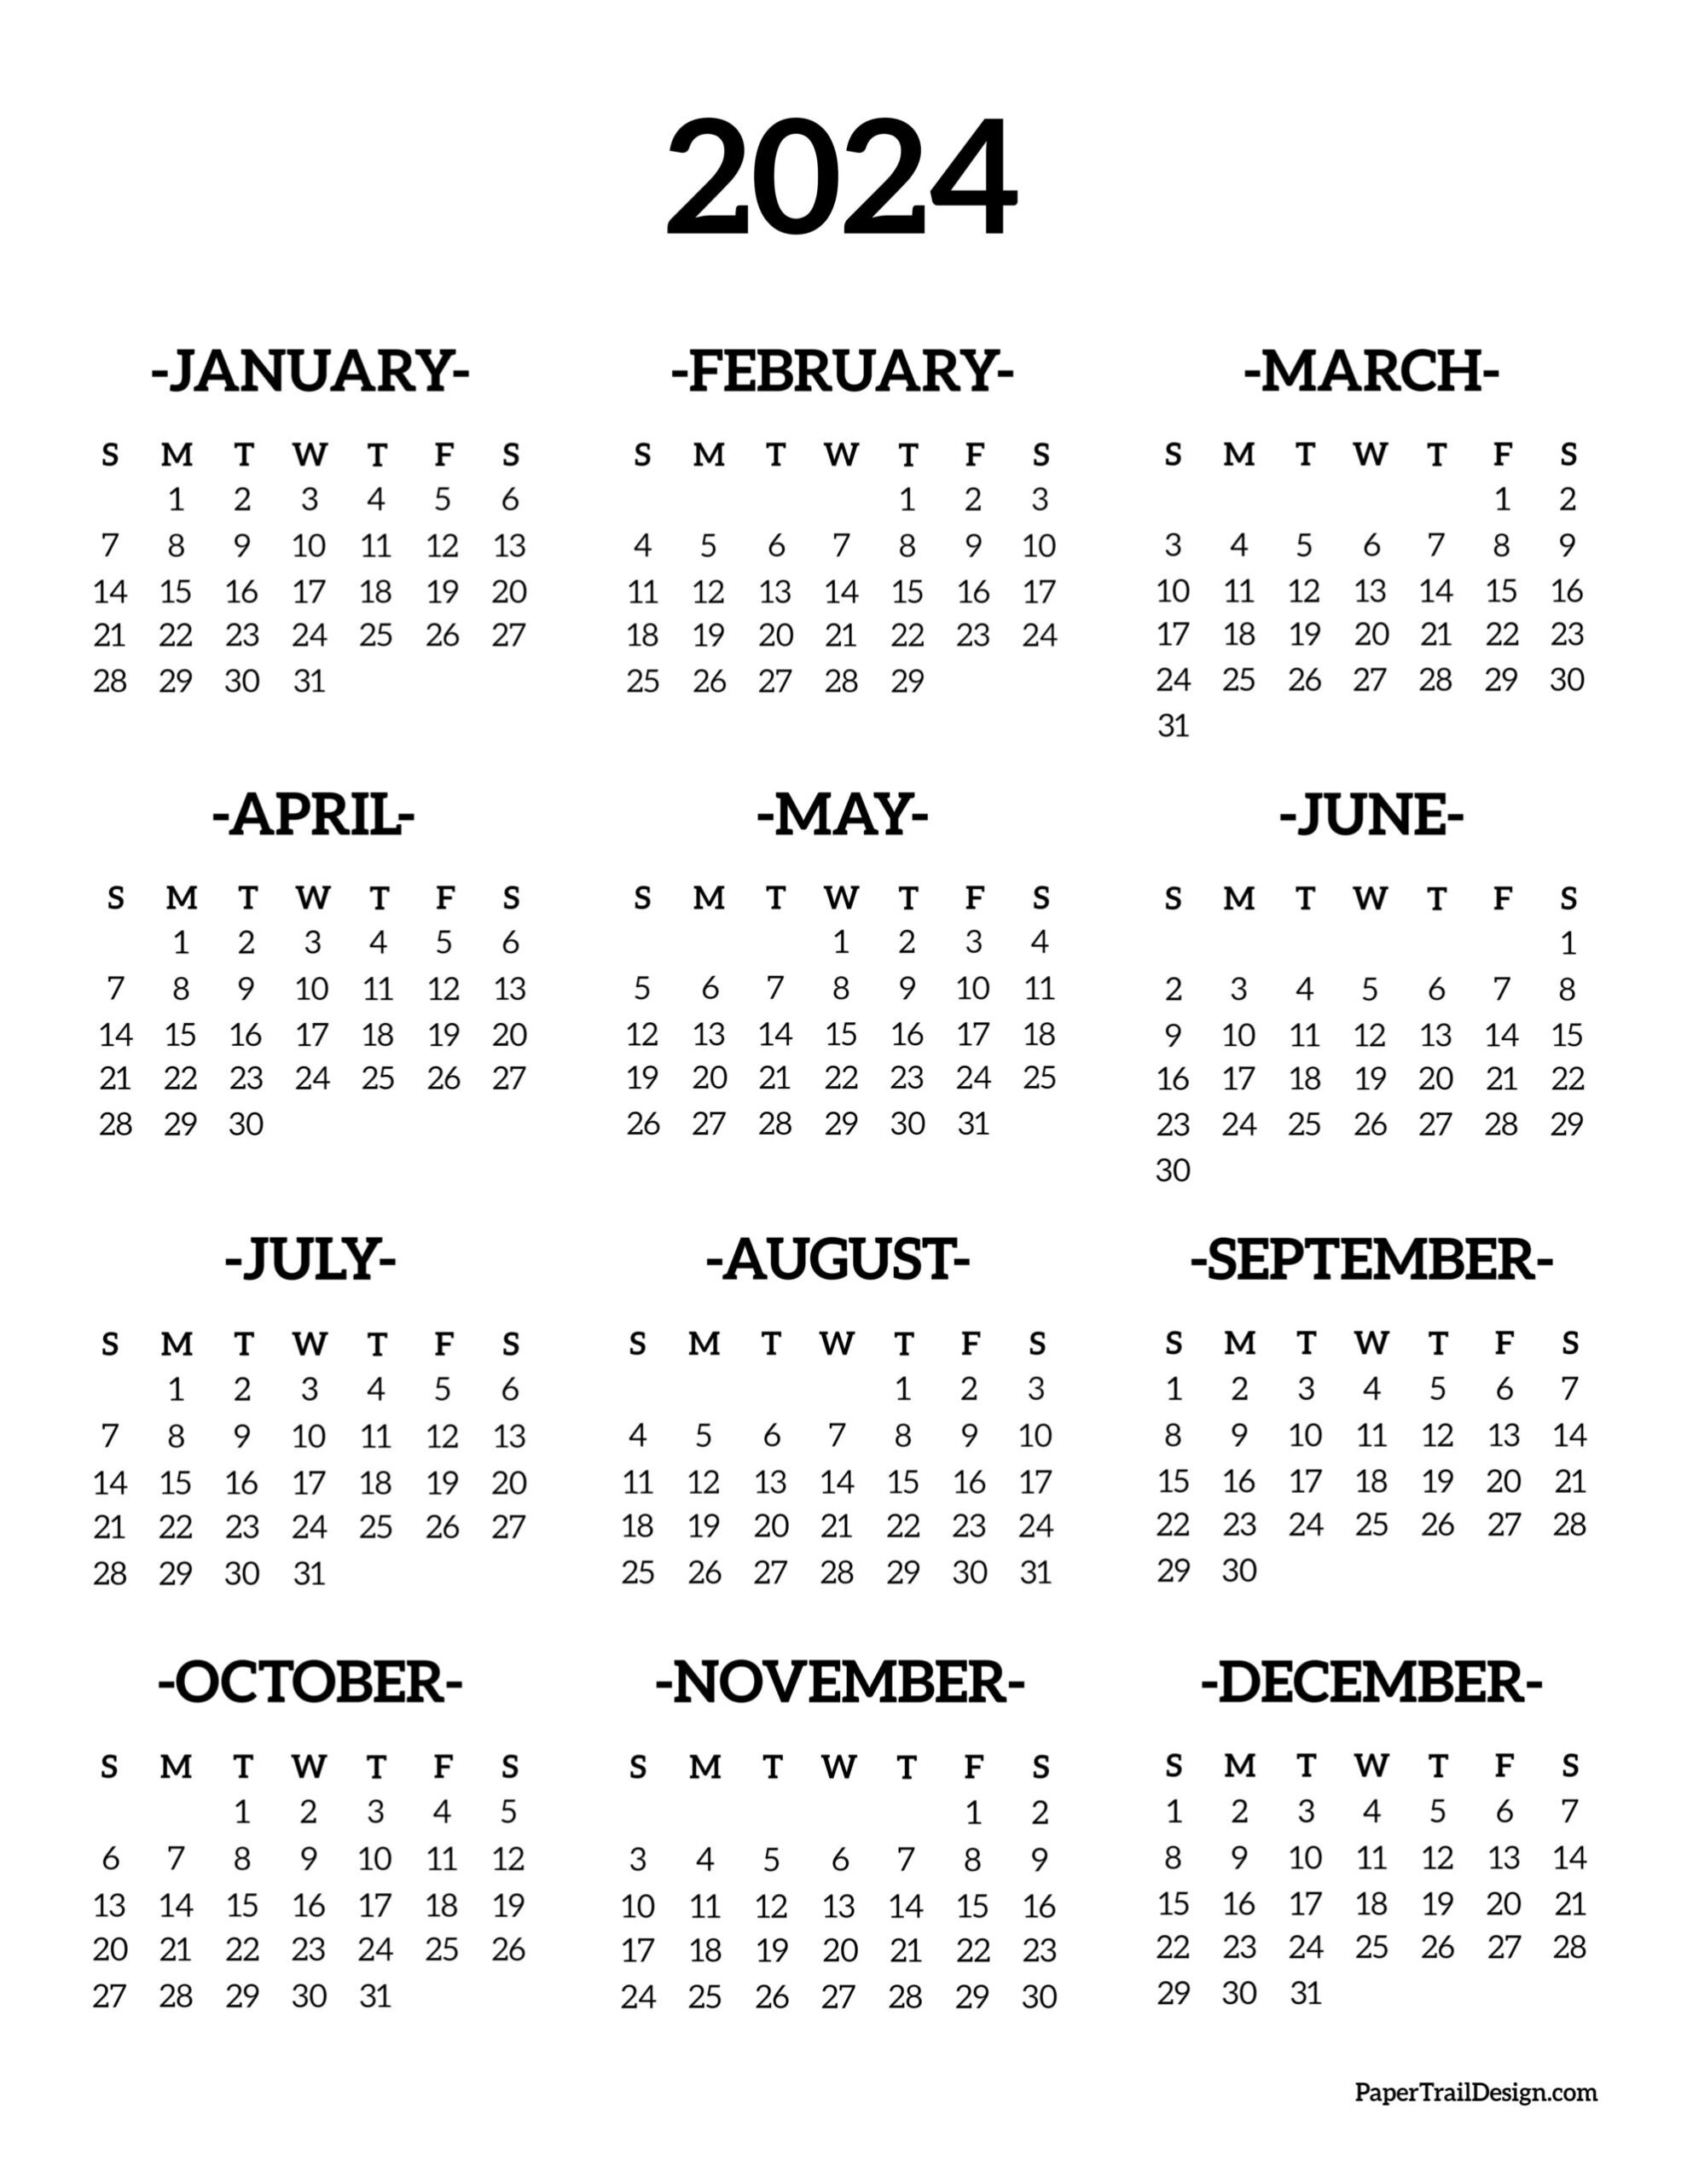 Calendar 2024 Printable One Page - Paper Trail Design | 2024 Year At A Glance Calendar Printable Free